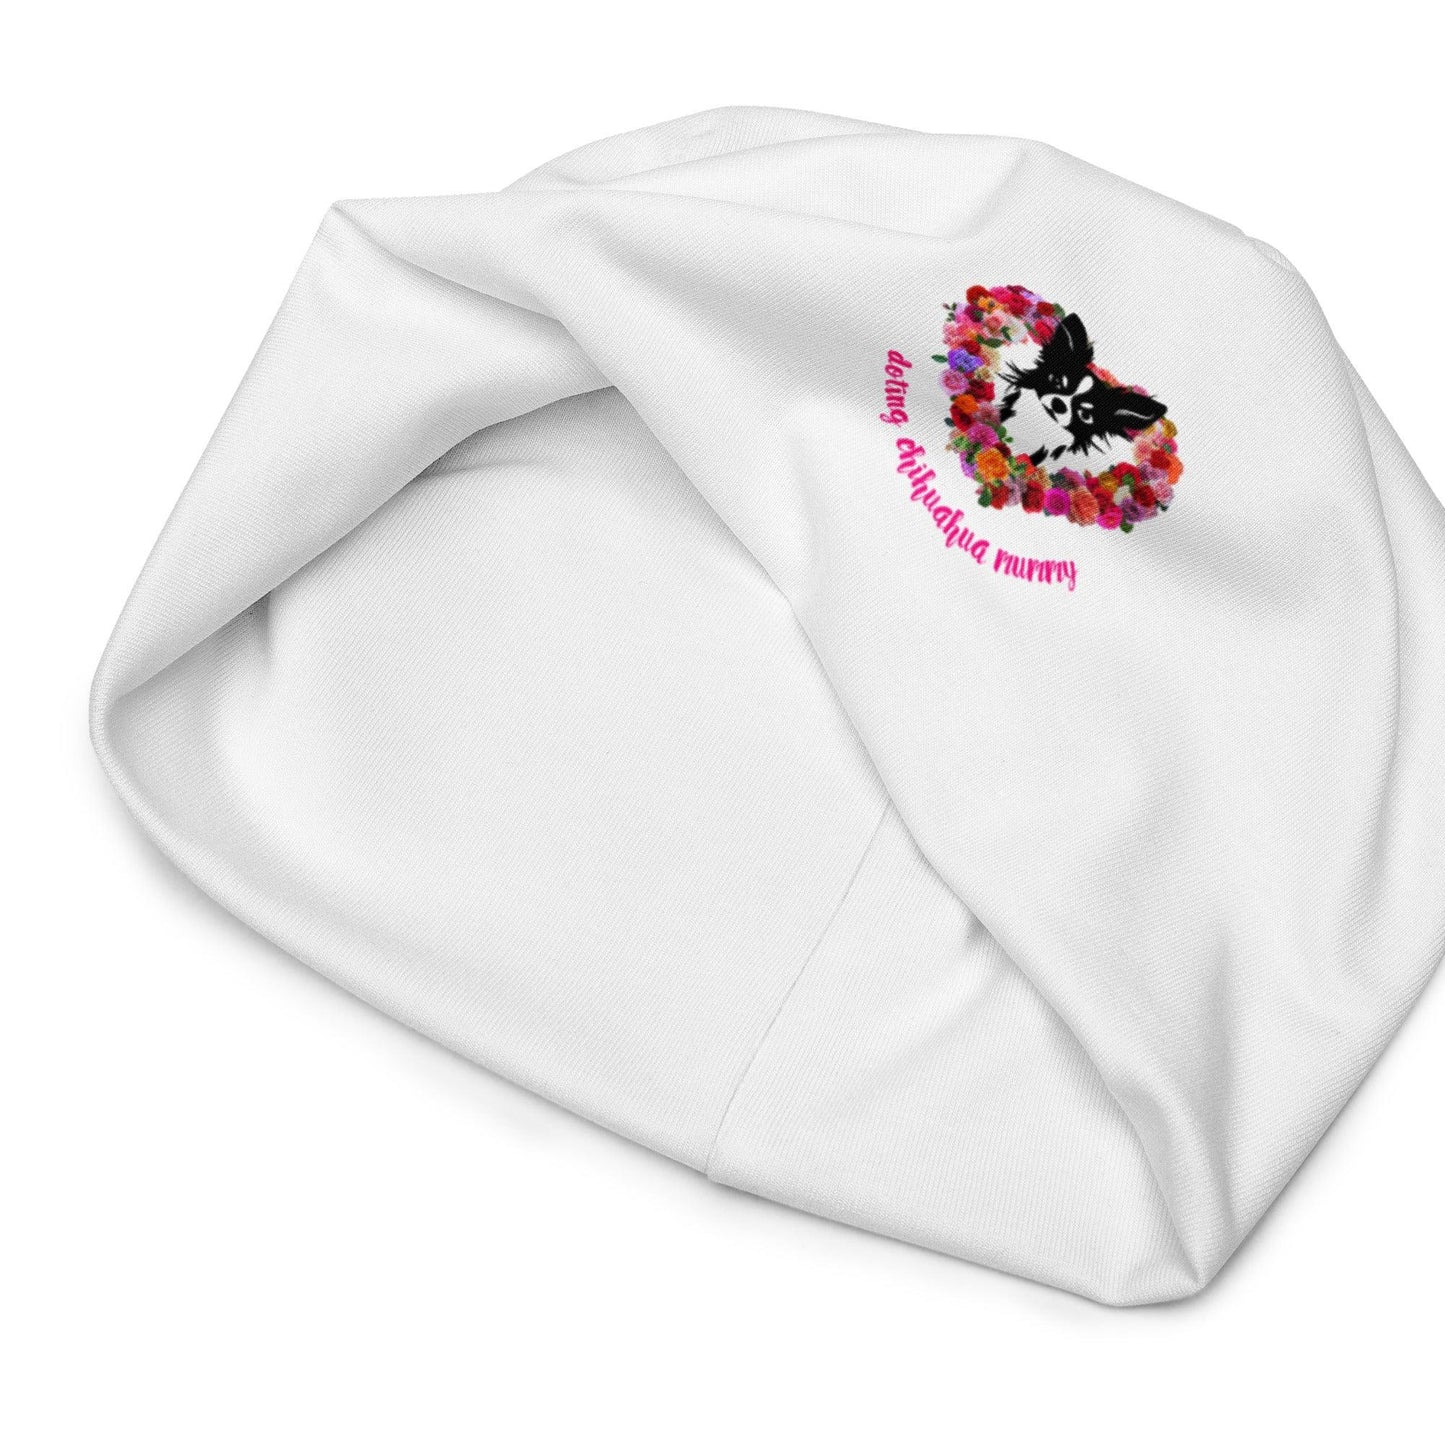 White chihuahua mum beanie. There's something so special about the bond between a girl and her chi baby. These cute little dogs charm their way deep into their mum's heart. This soft and comfy chihuahua and roses beanie makes a divine Mother's Day / birthday / Christmas gift for a doting chihuahua mummy. "Aw" guaranteed! Design by Renate Kriegler for Chimigos.